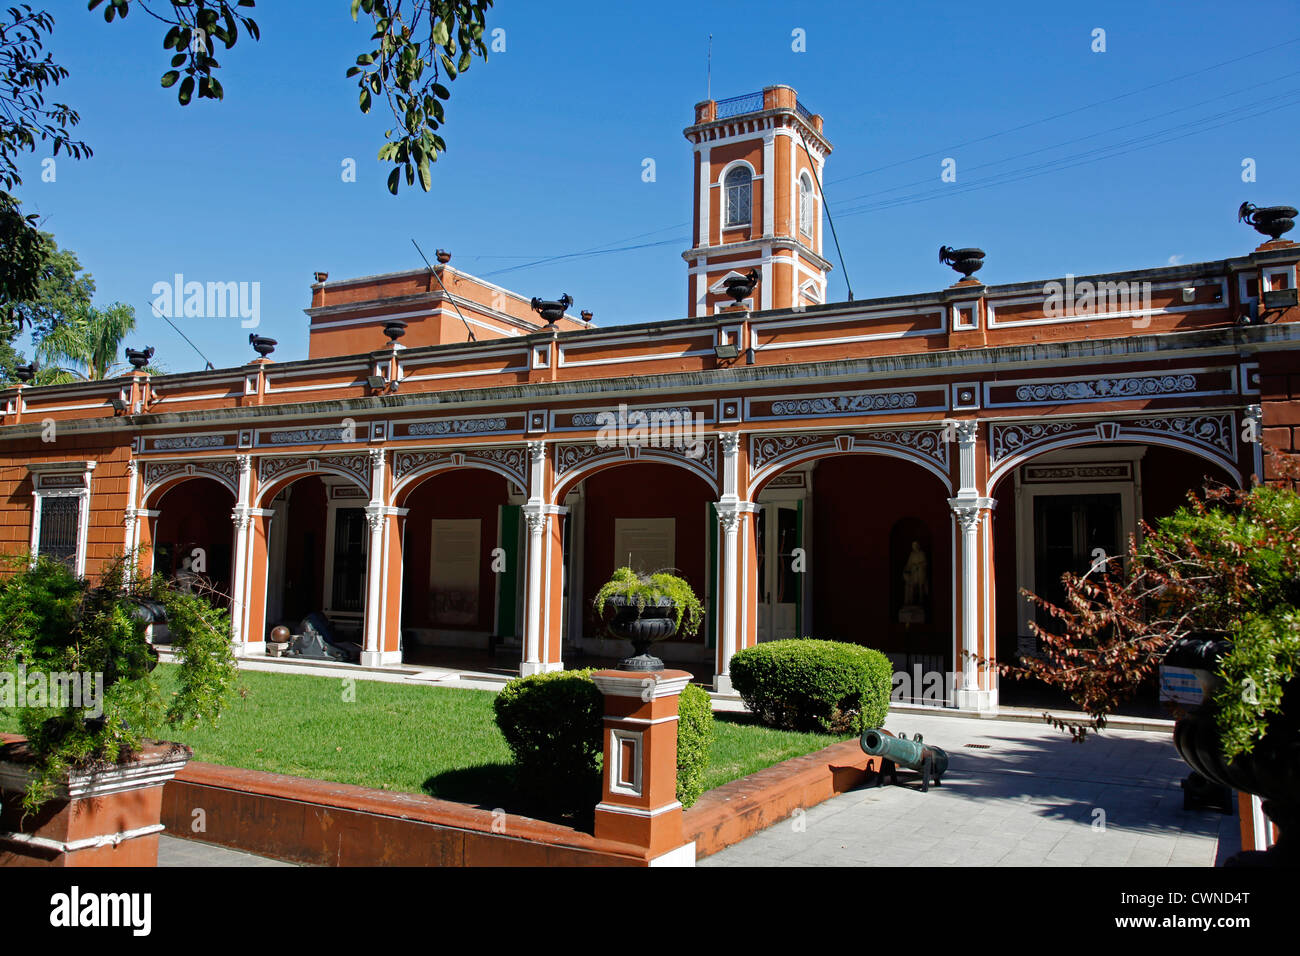 Museo Historico Nacional or National history museum in San Telmo, Buenos Aires, Argentina. Stock Photo